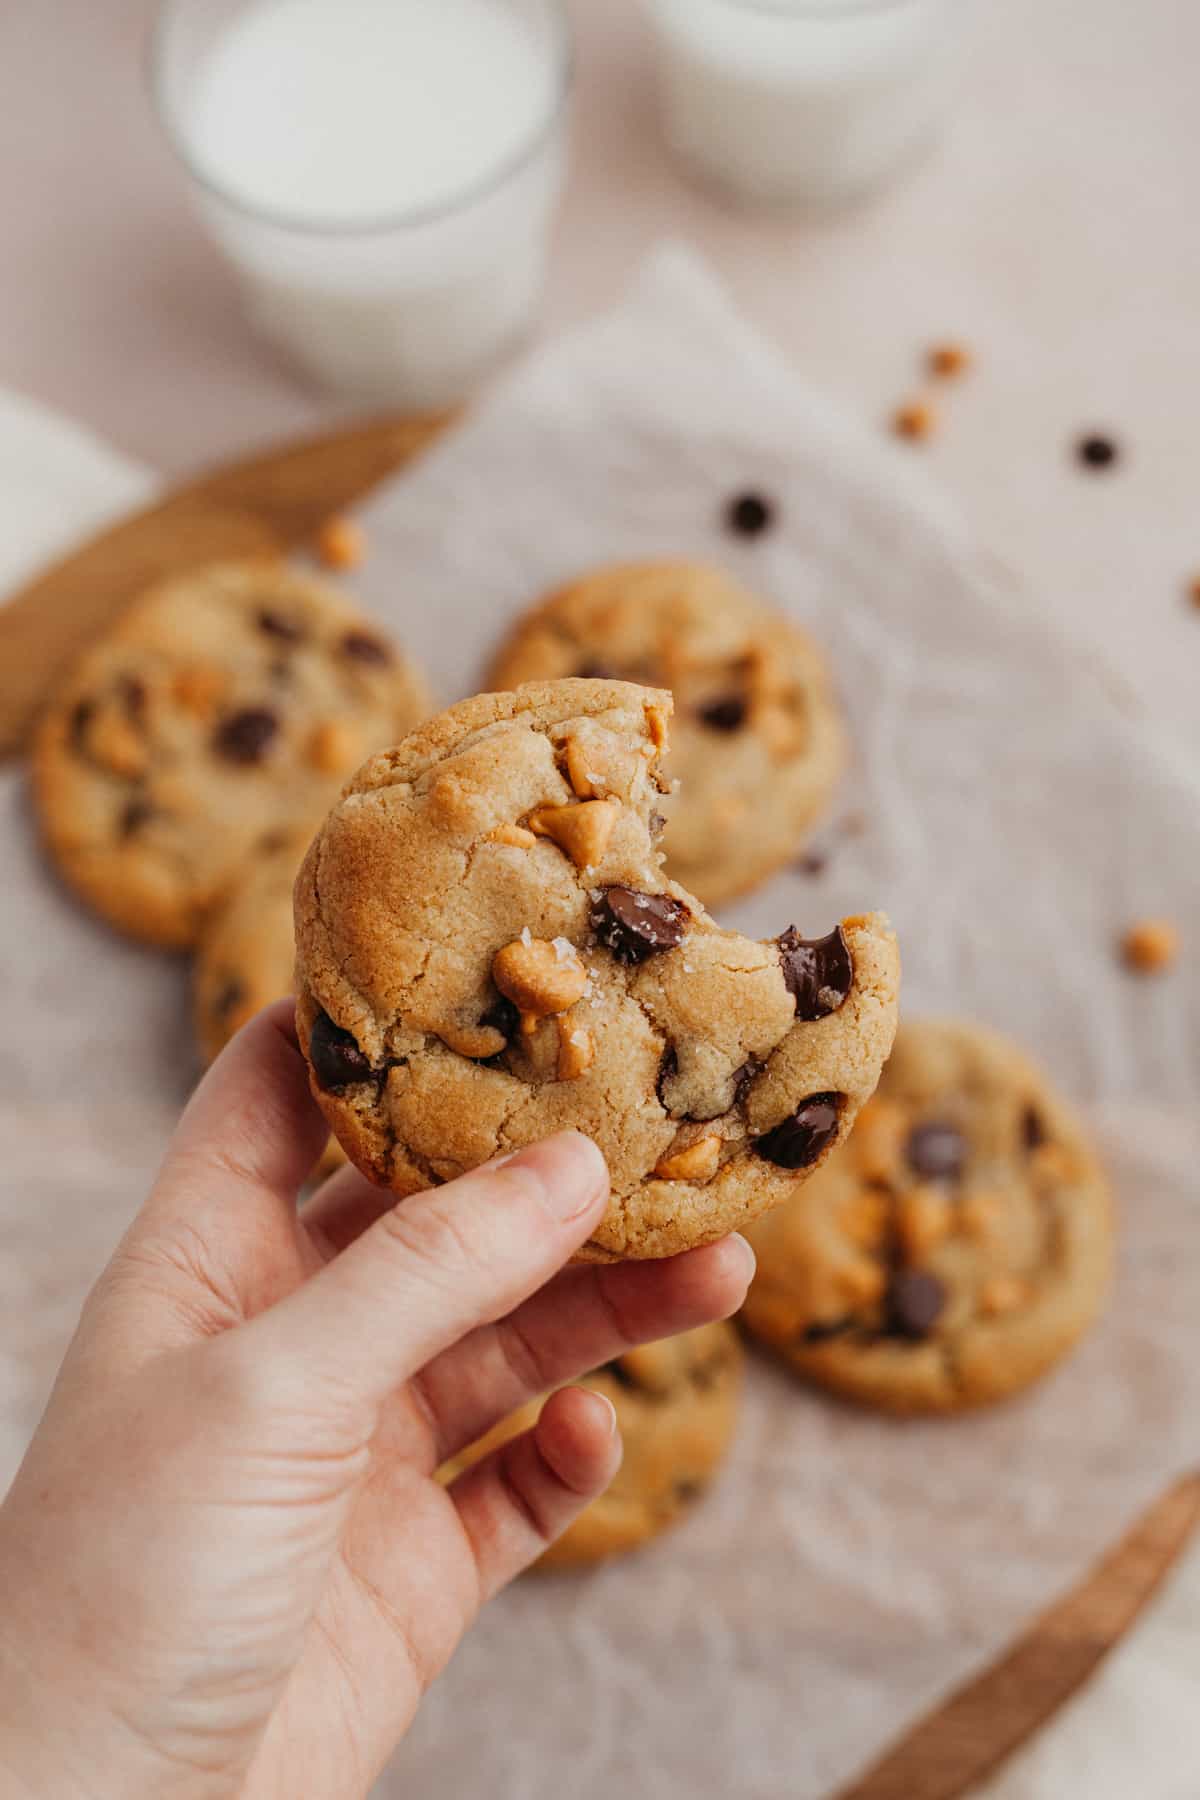 A white hand holding a chocolate chip butterscotch cookie, a bite has been taken out of it